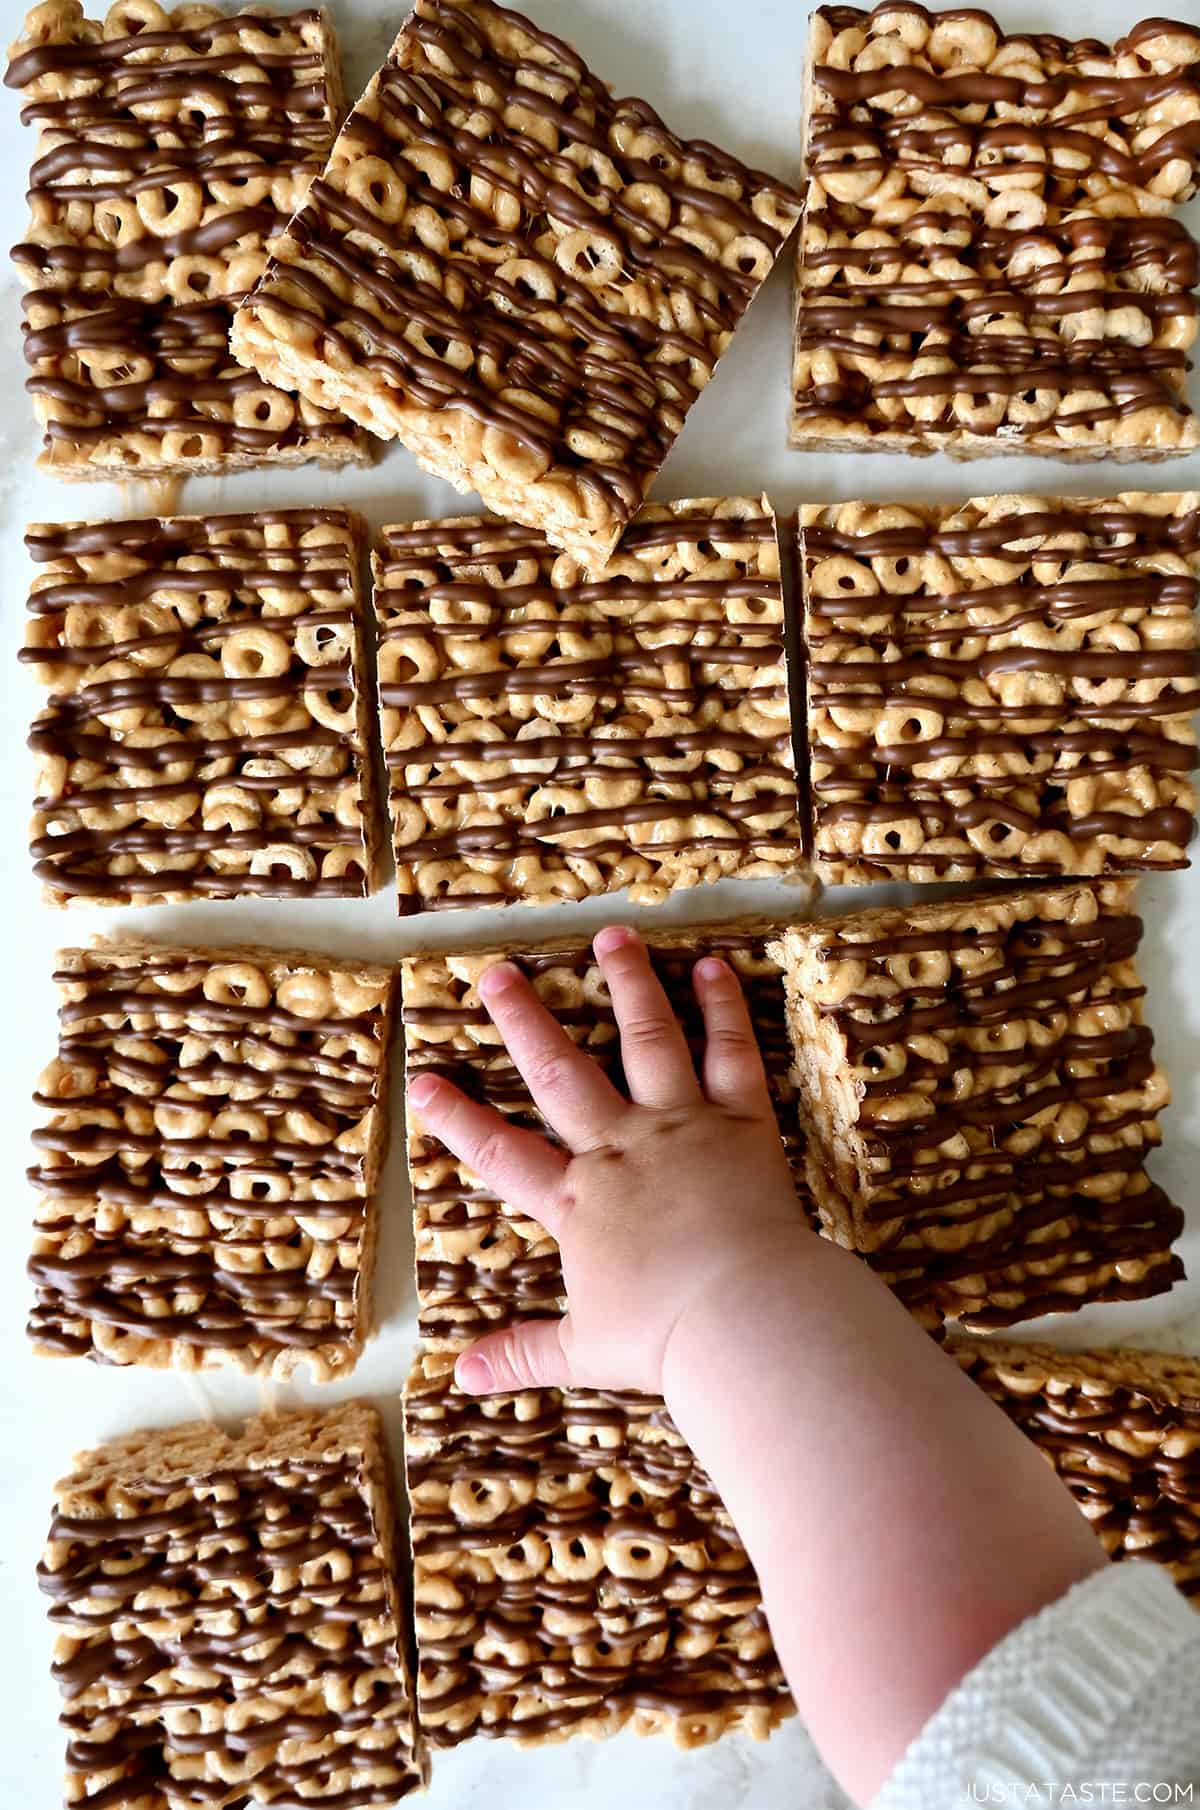 A child's hand reaches for a peanut butter Cheerio's marshmallow treat.